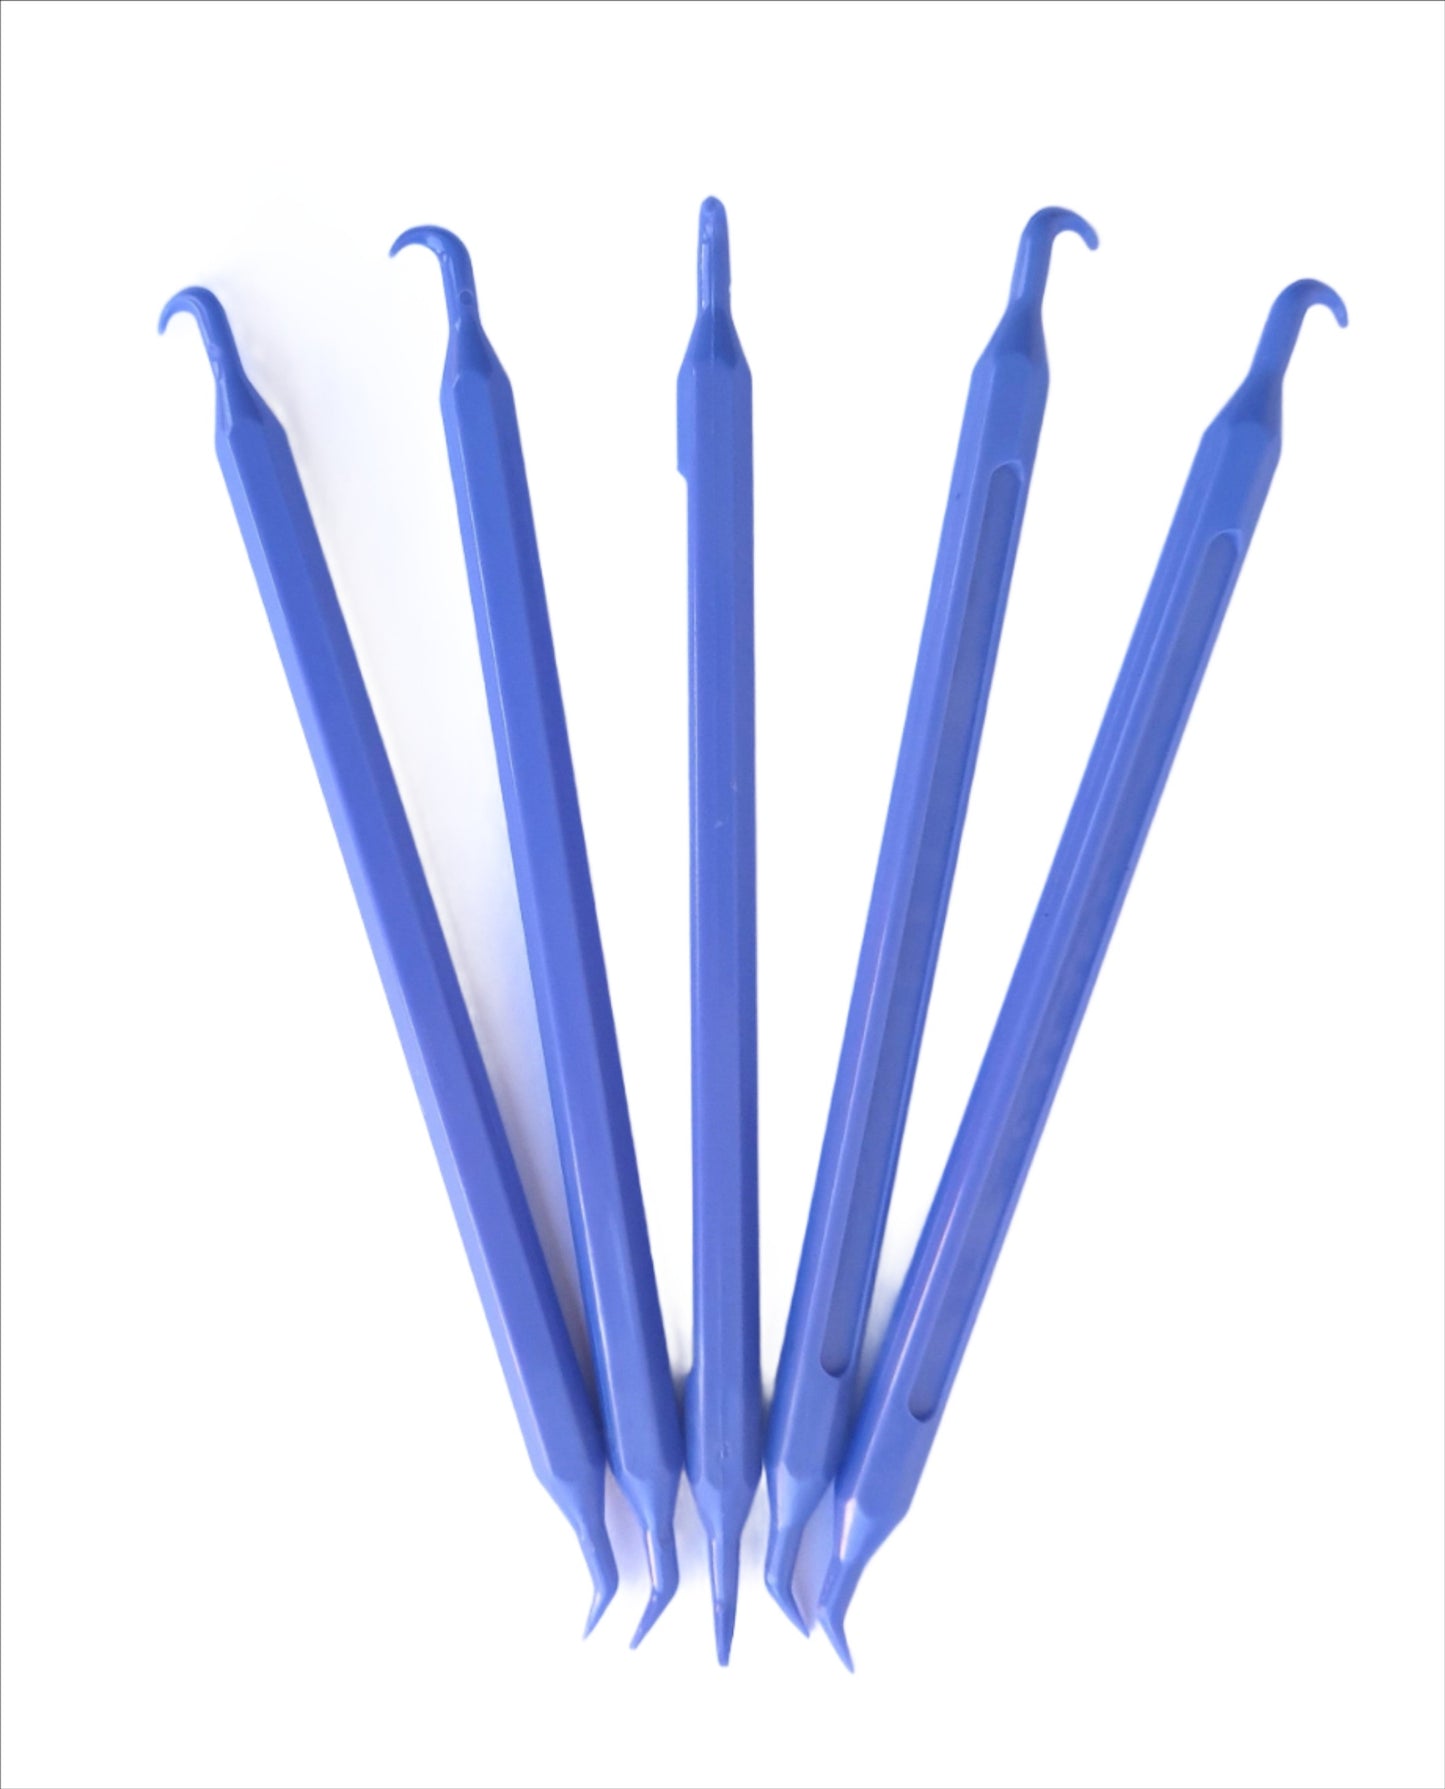 Pack of 5 Polycarbonate O-Ring Pick Up Pick Tool - Strong, Non Scratch, Non Conductive